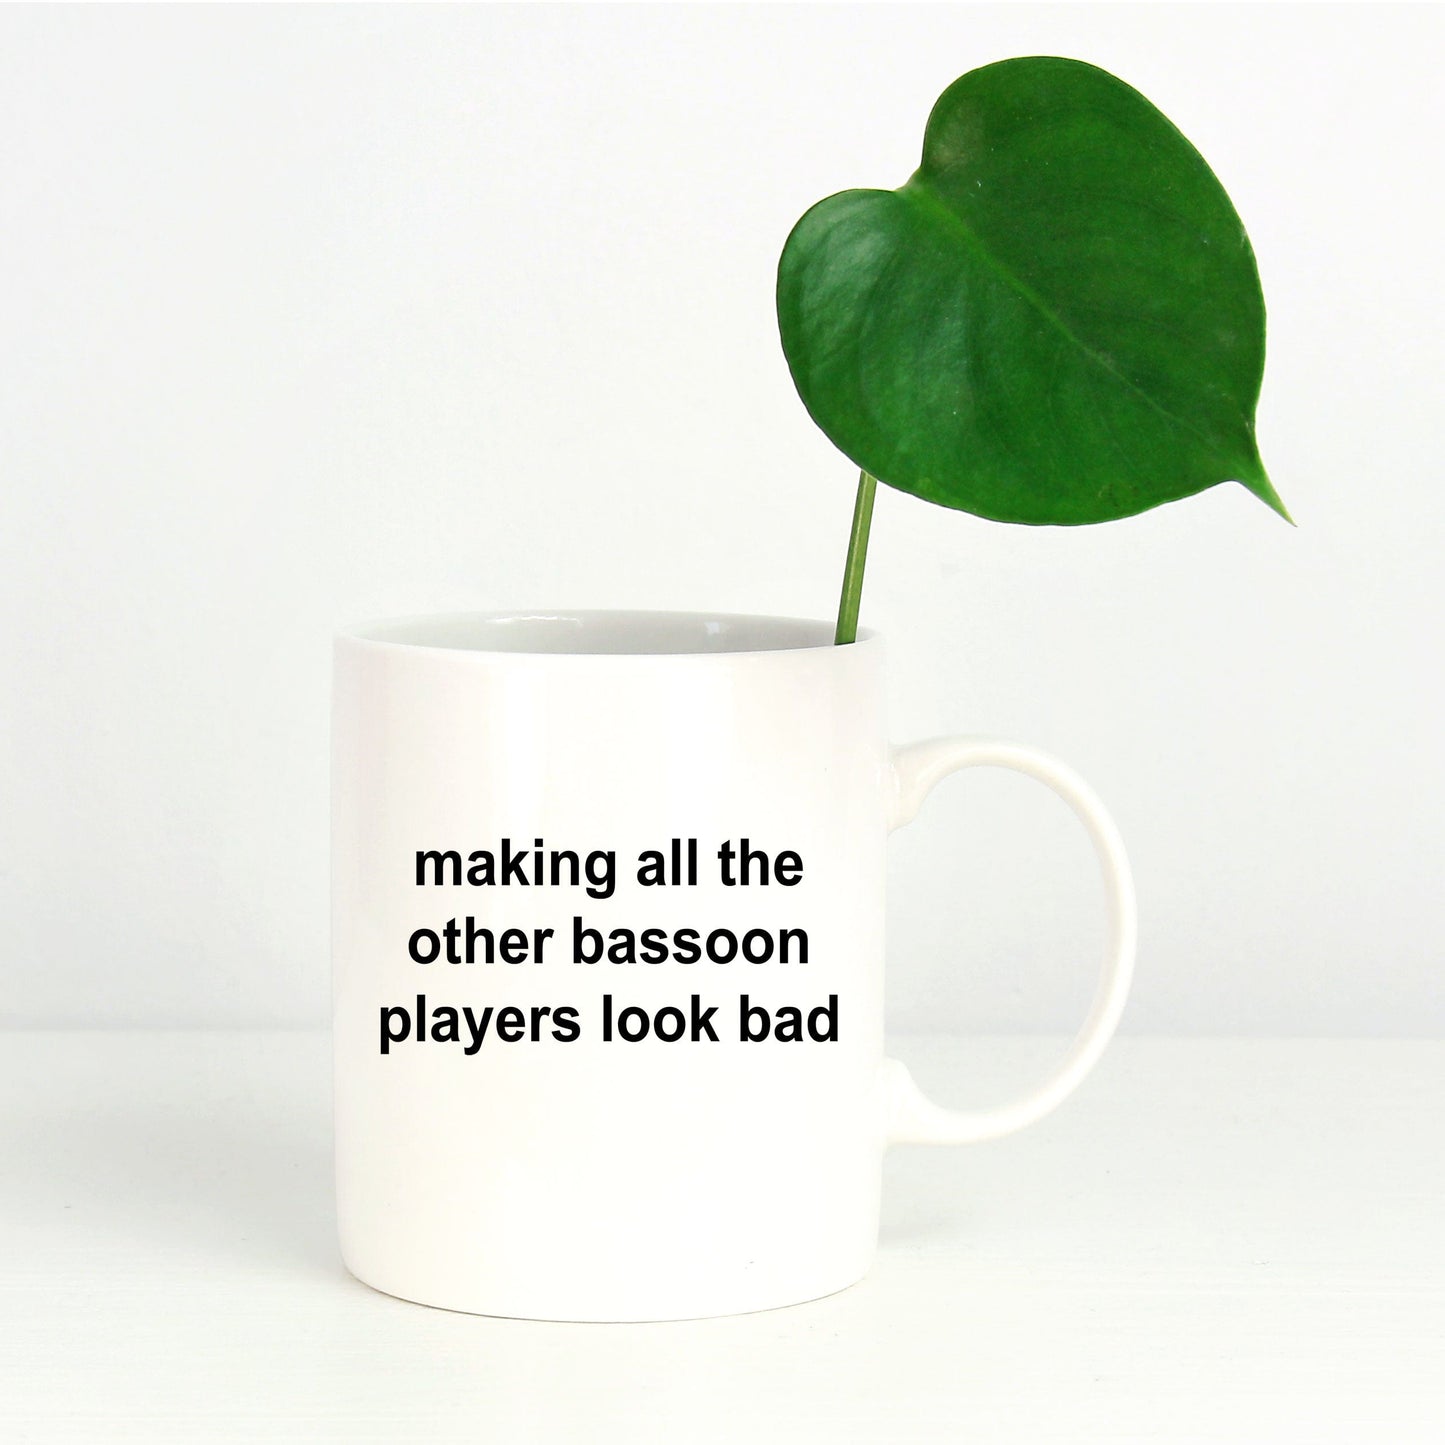 Making All The Other Bassoon Players Look Bad Coffee Mug